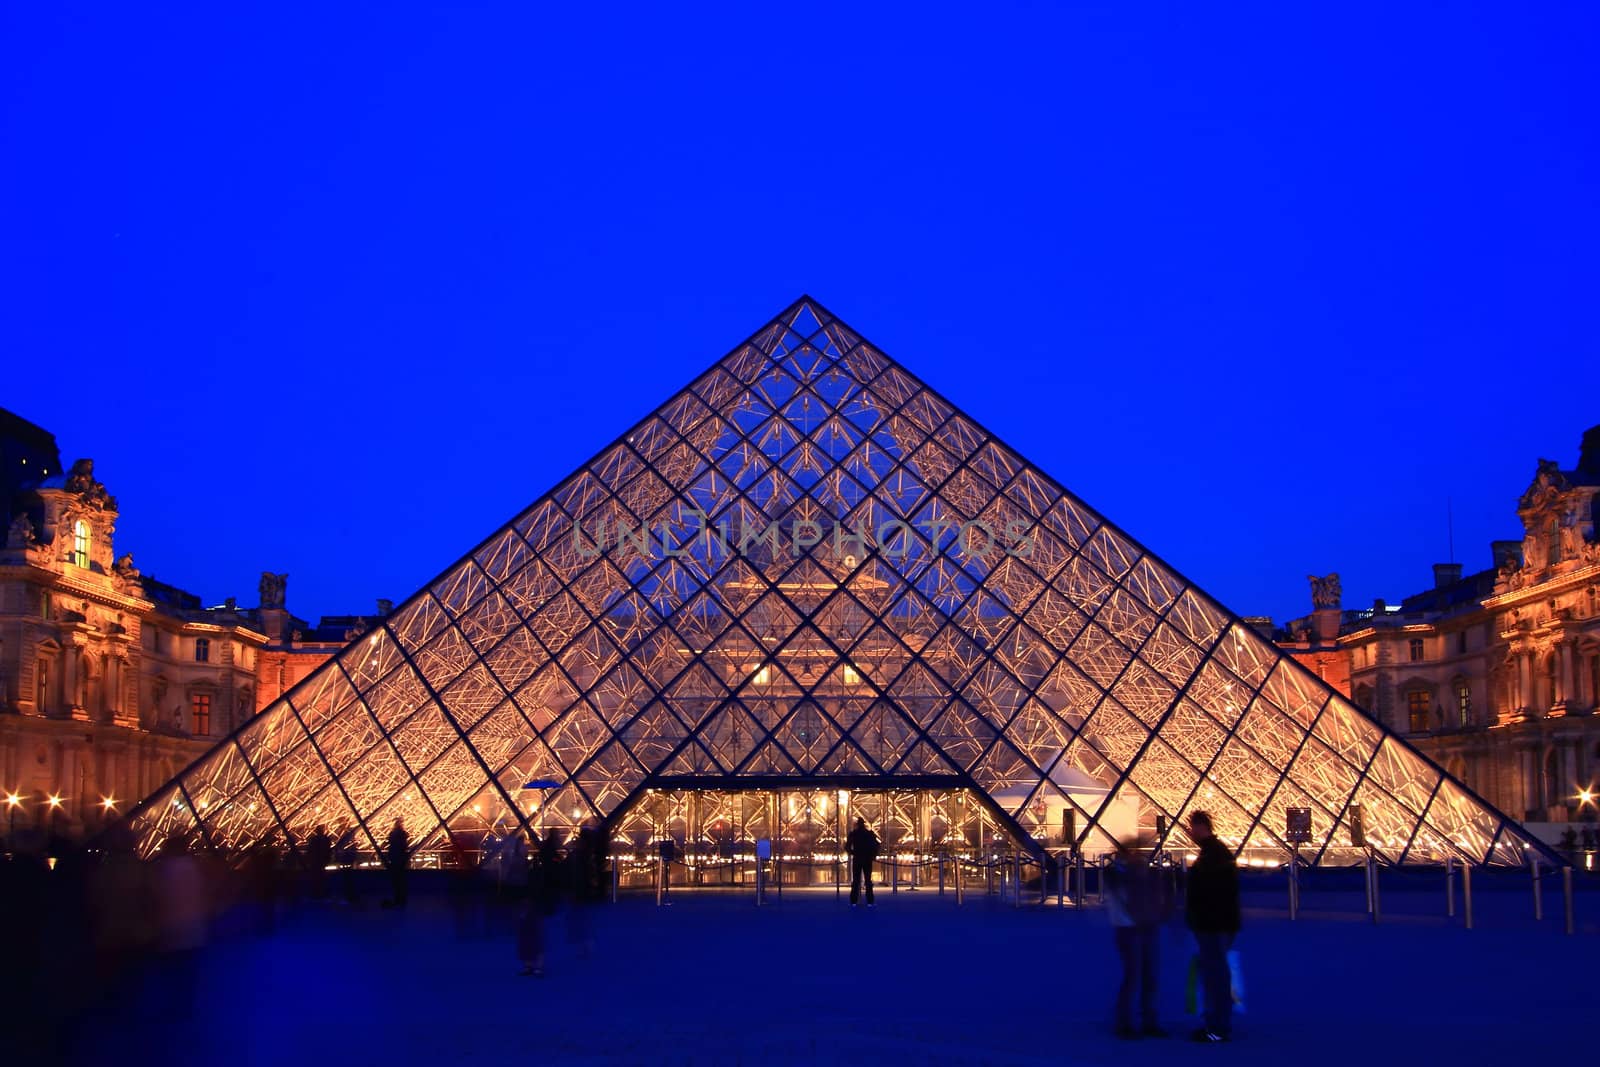 PARIS - APRIL 16: Entrance of Louvre pyramid shines at dusk during the Summer Exhibition April 16, 2010 in Paris. This is one of the most popular tourist destinations in France.